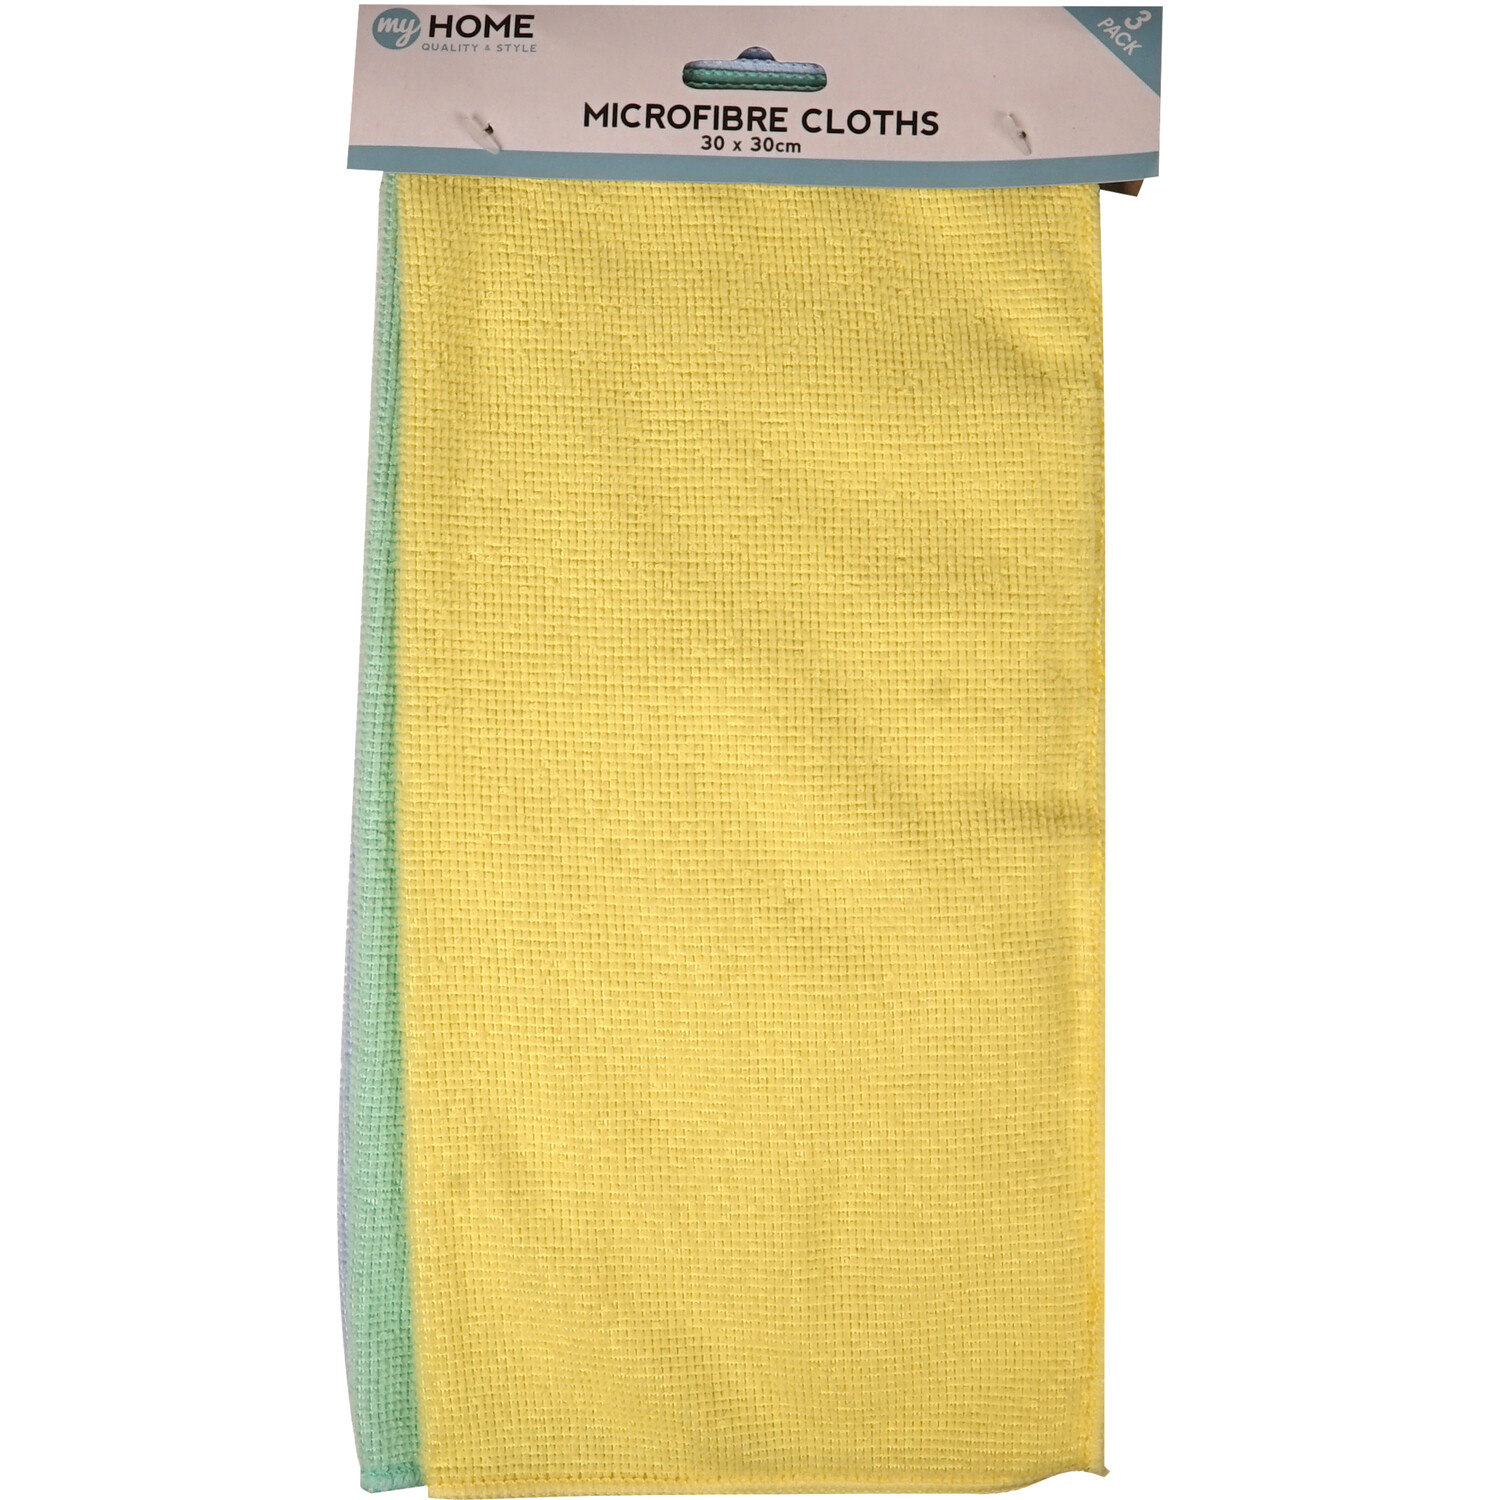 Pack of 3 Microfibre Cloths Image